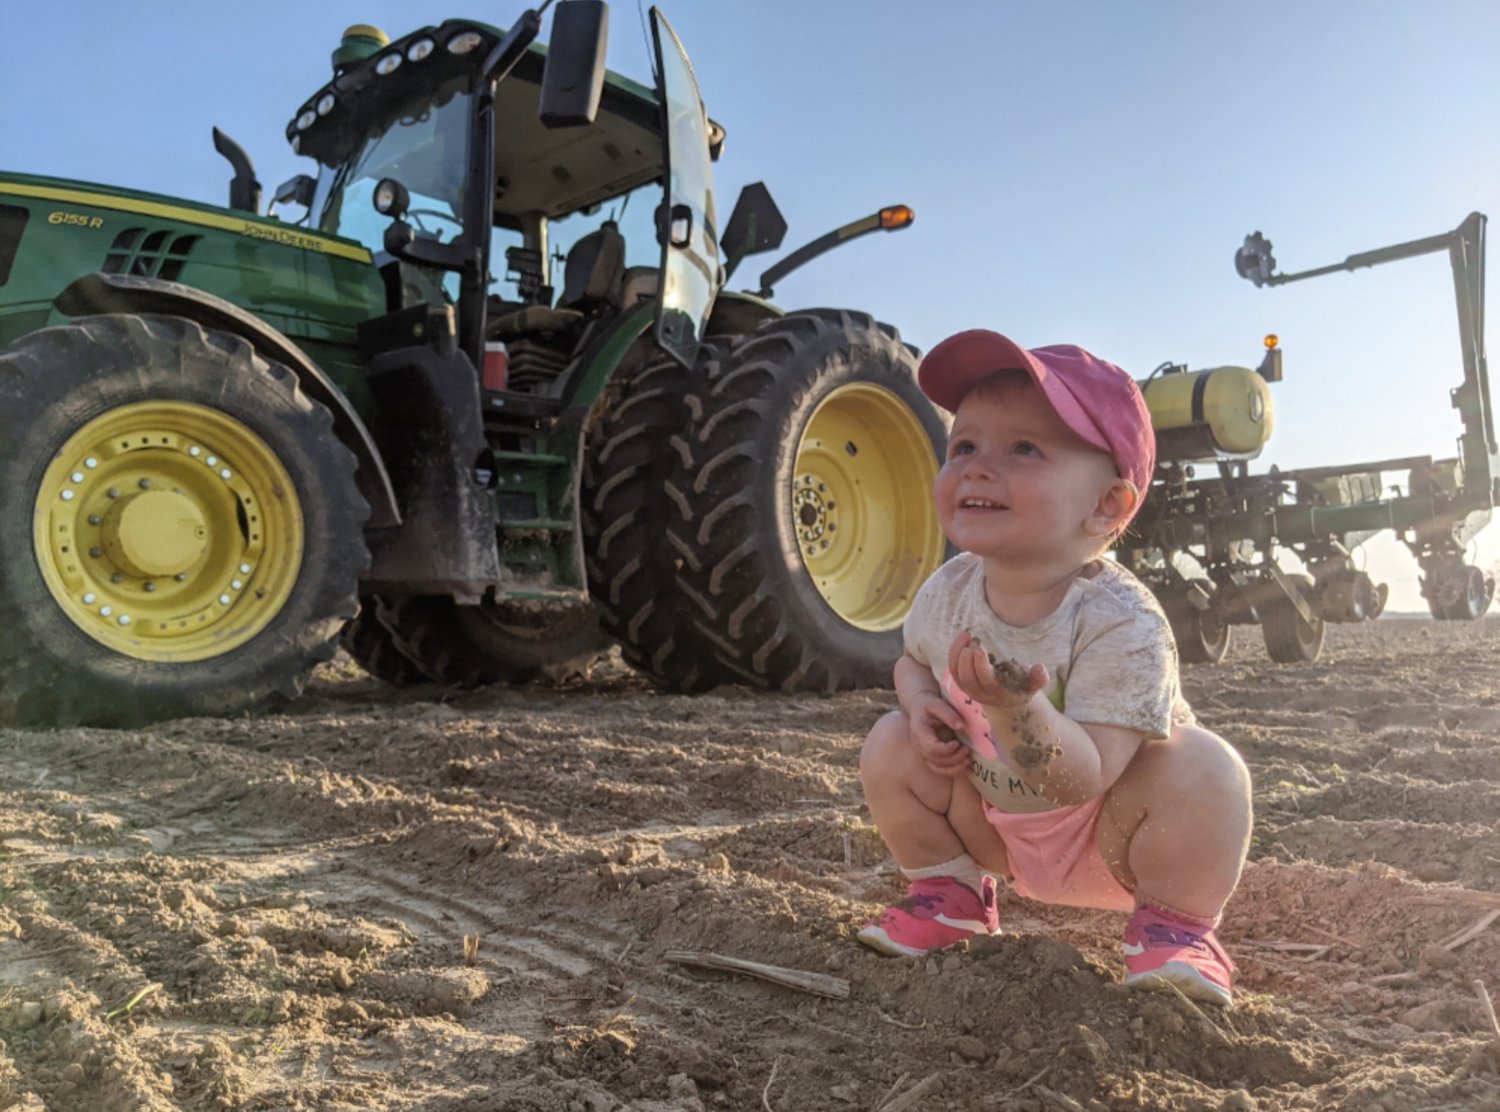 “Ready for Seed” wins Honorable Mention in the Faces of the Farm category of the Focus on Missouri Agriculture Photo contest hosted by the MO Dept. of Agriculture. Taken by Haley Scott at her farm north of Fordland, the photo features her daughter two and a half year old Clara.